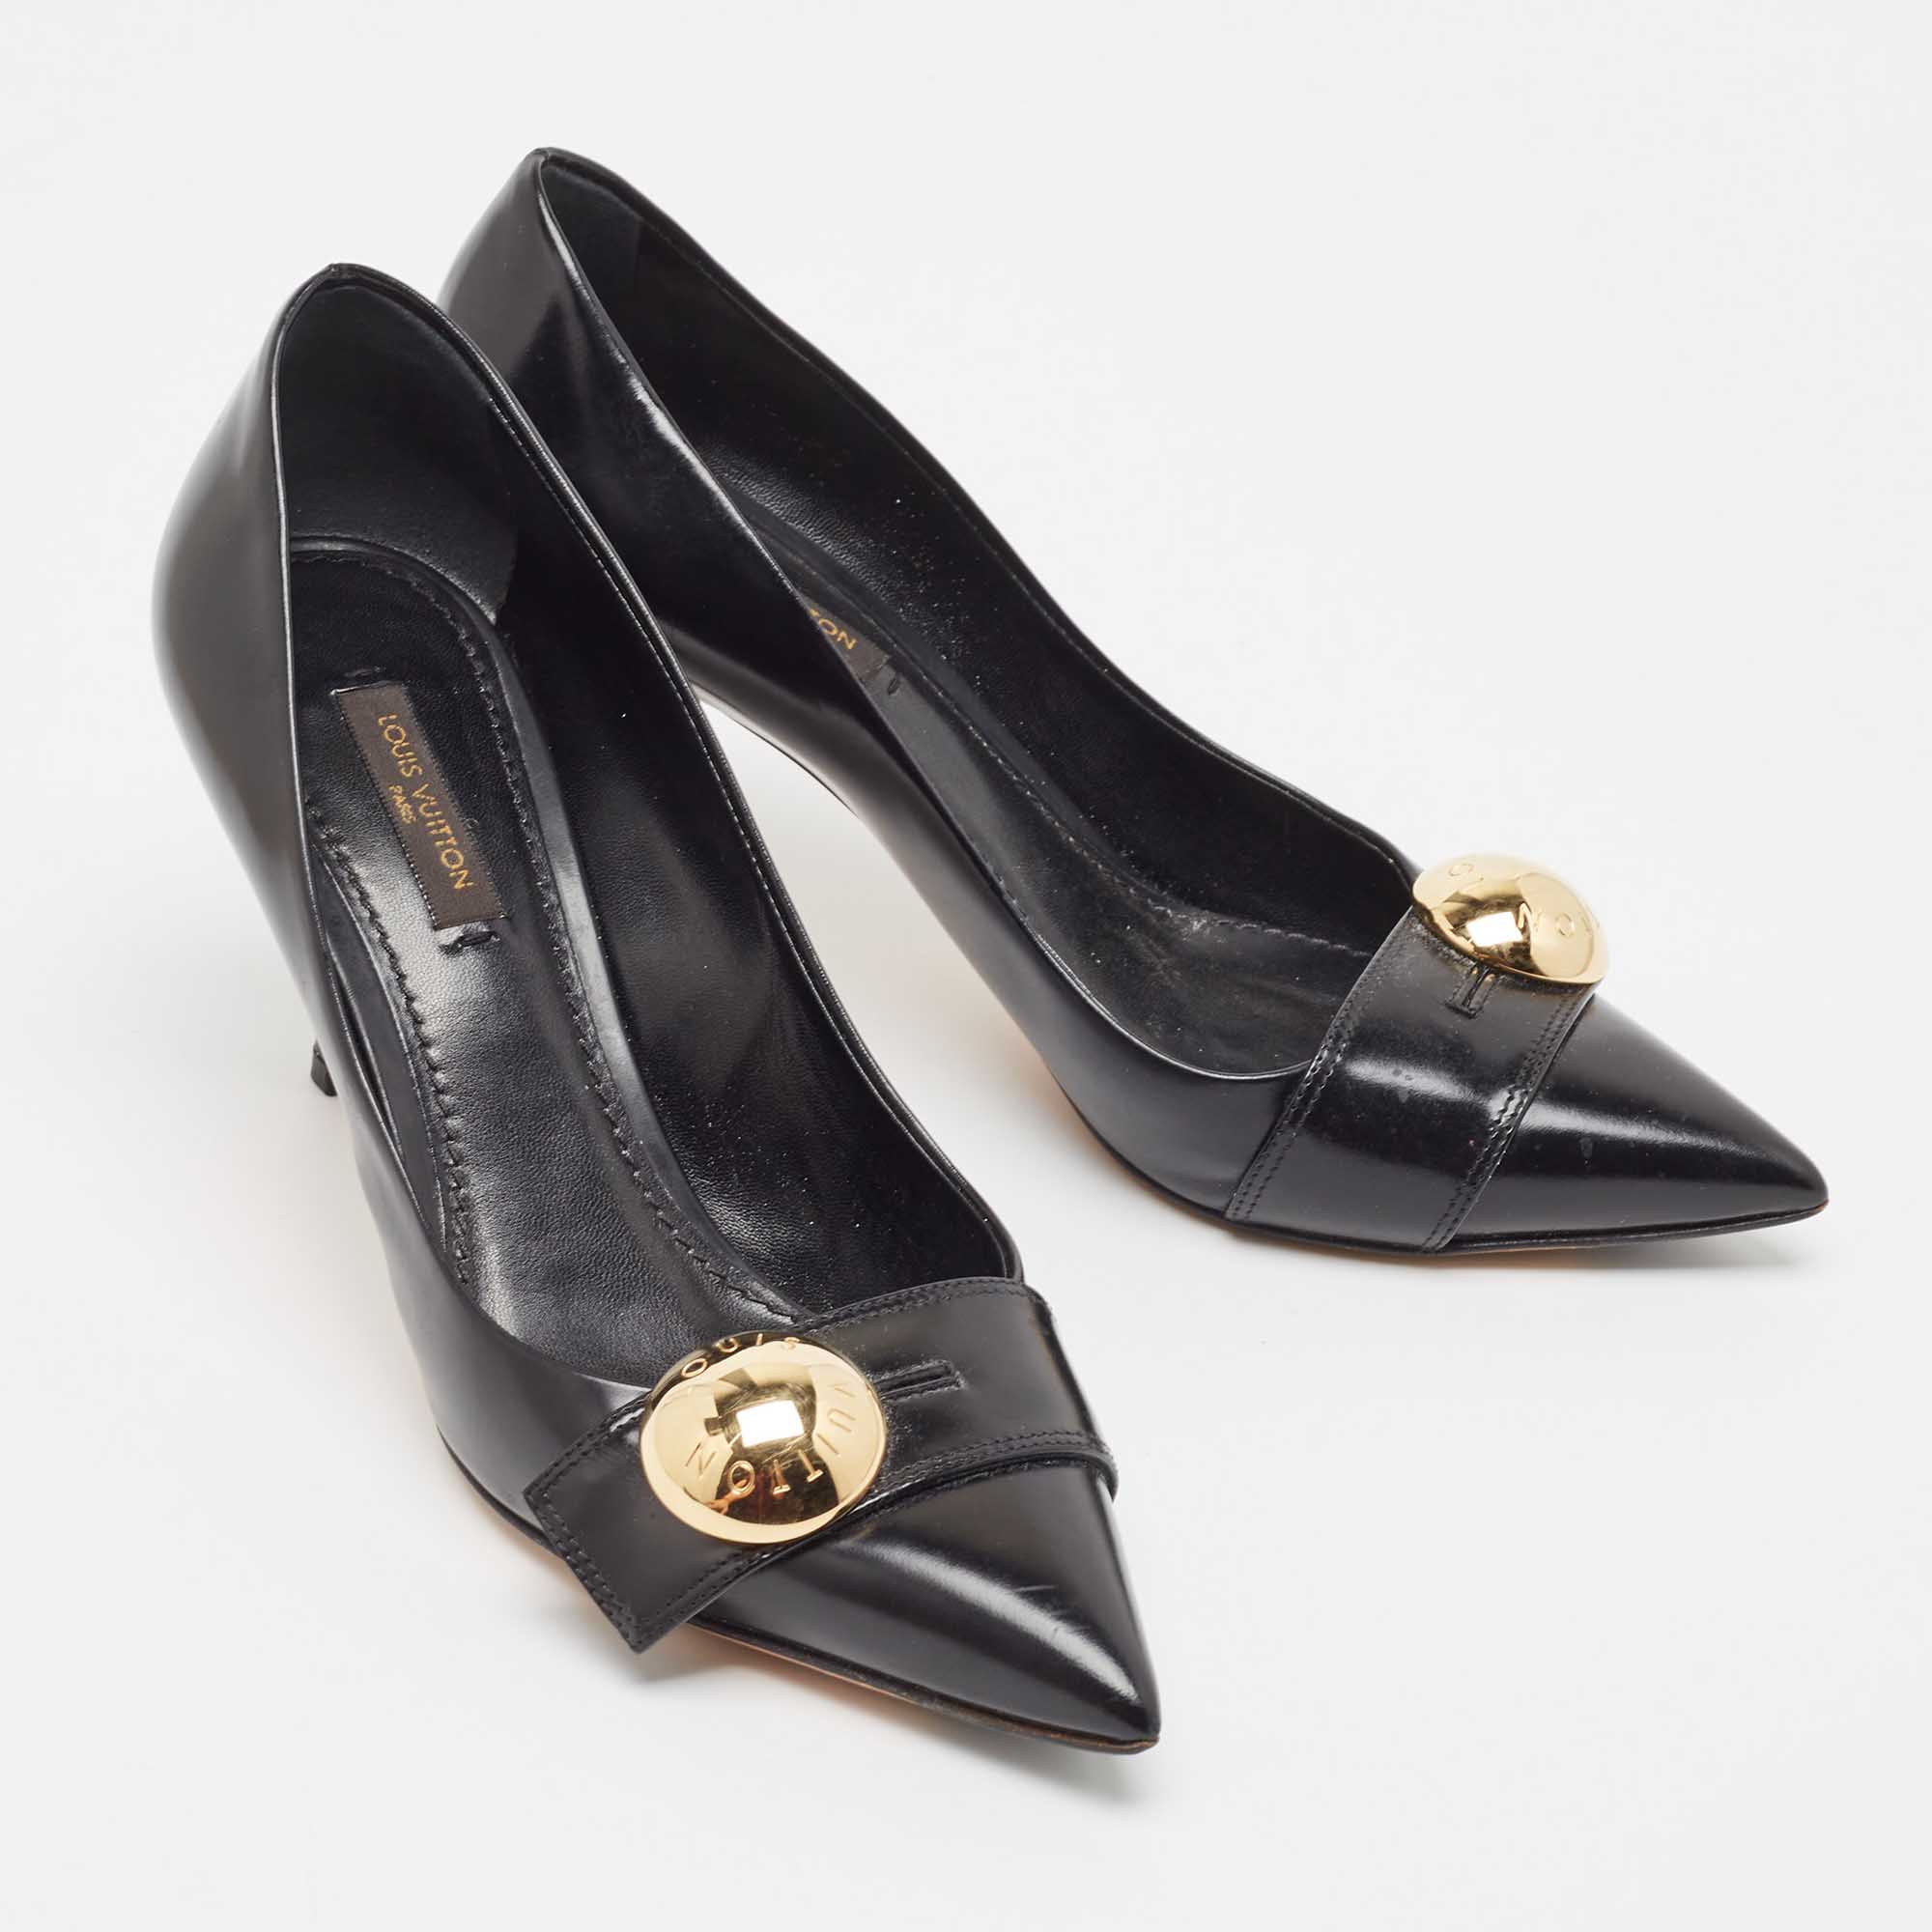 Louis Vuitton Black Leather Embellished Pointed Toe Pumps Size 37